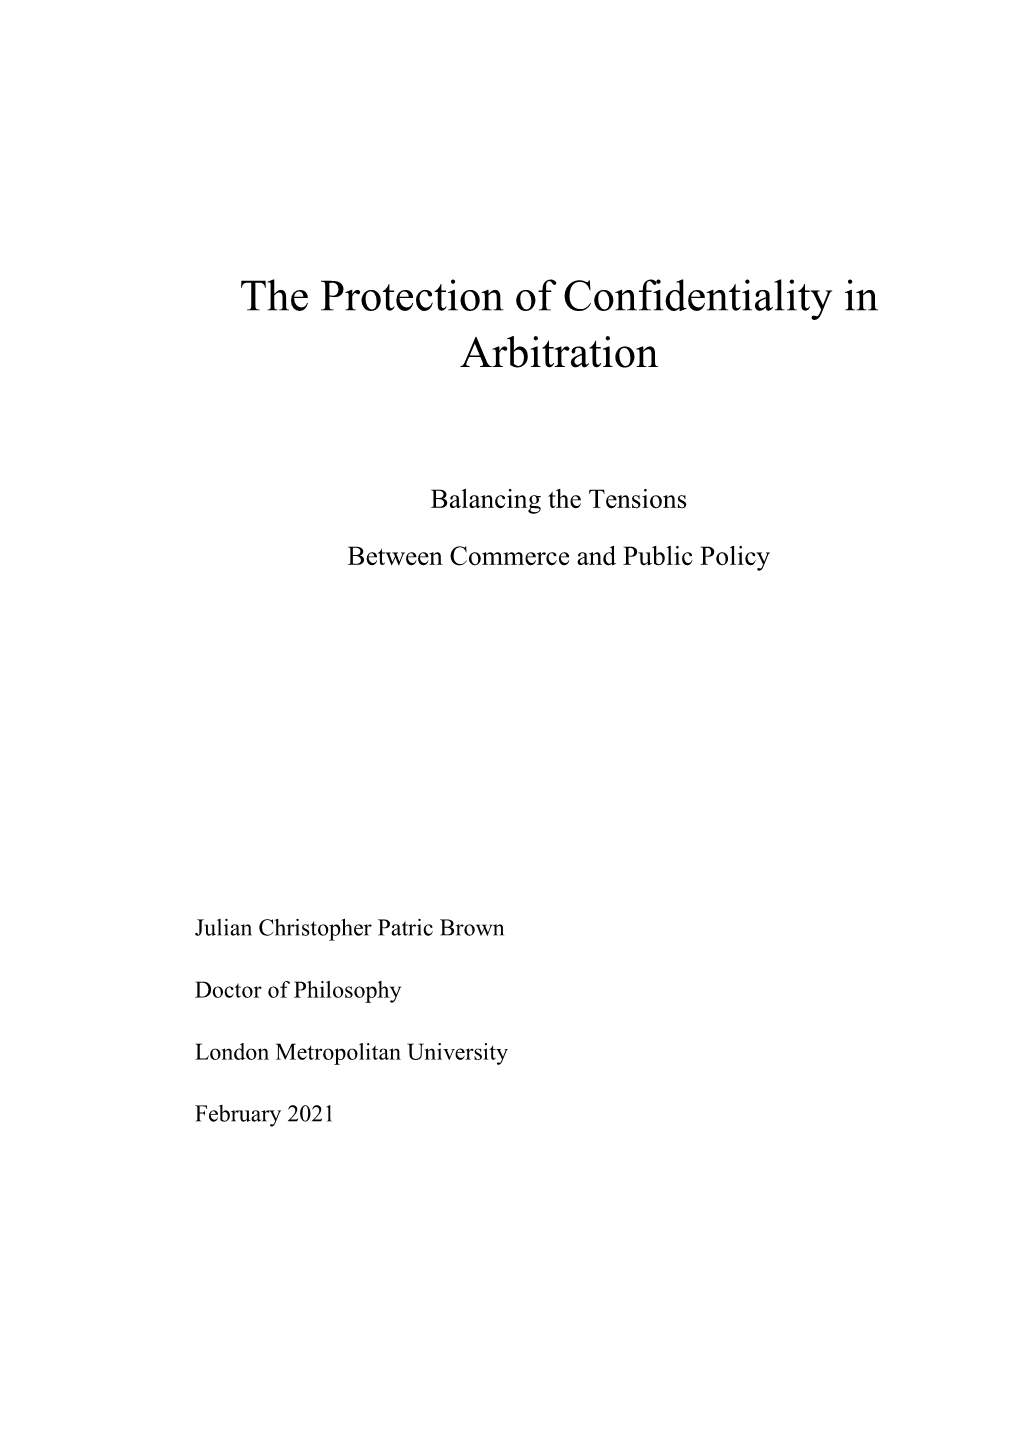 The Protection of Confidentiality in Arbitration